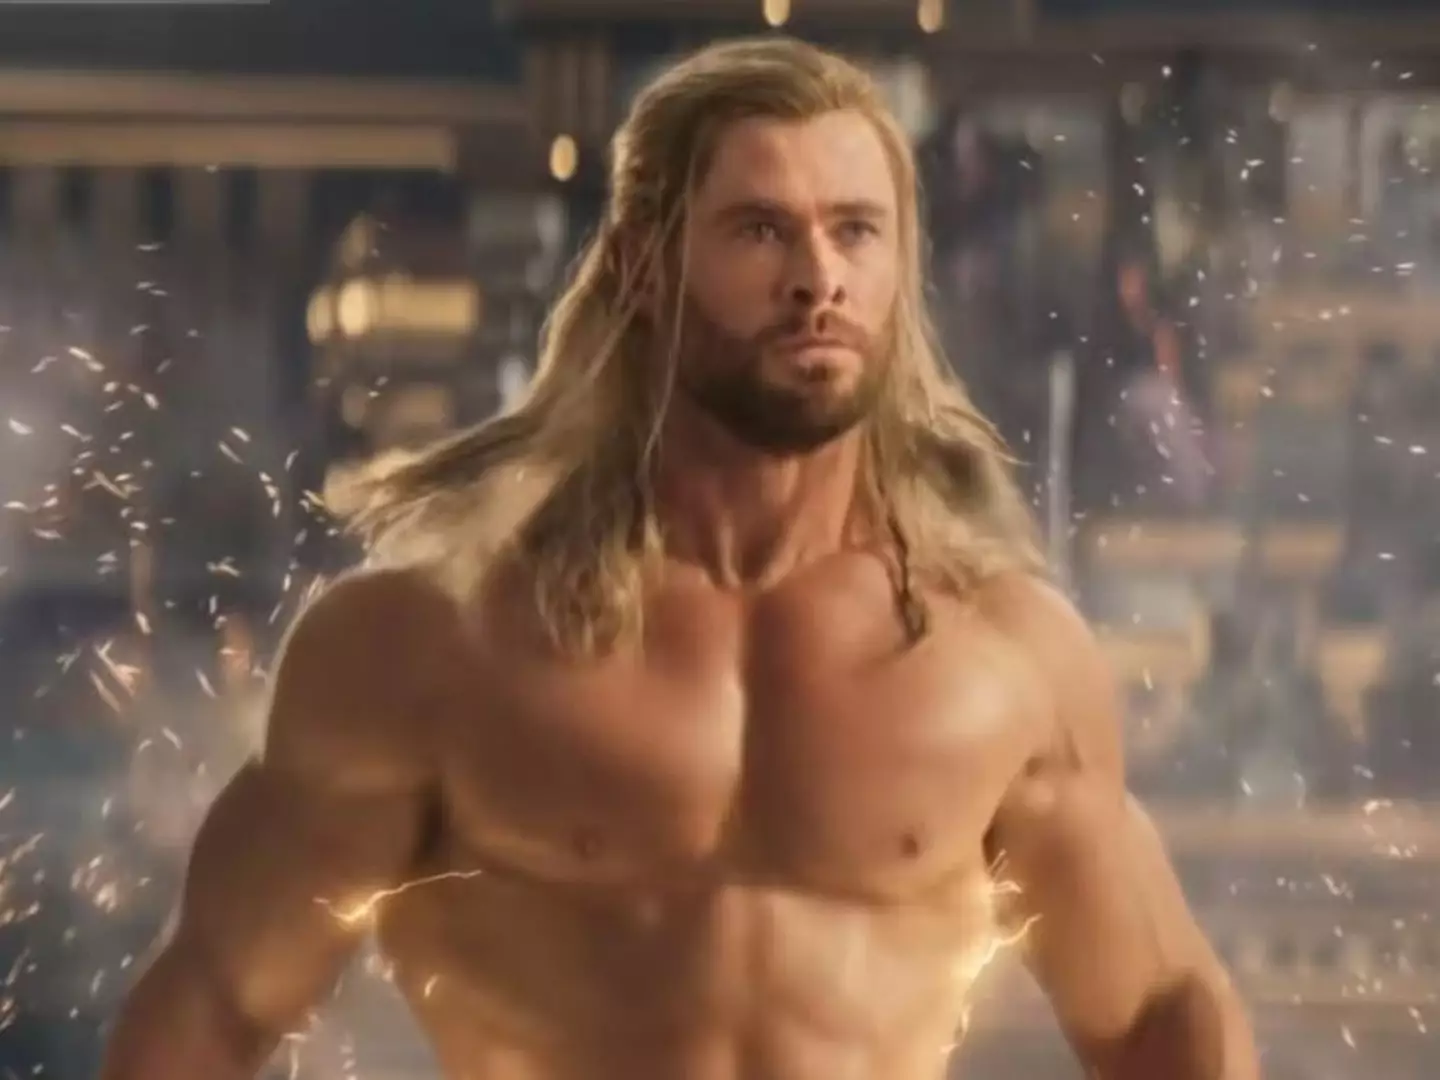 Chris Hemsworth needs to keep in shape for his various roles.